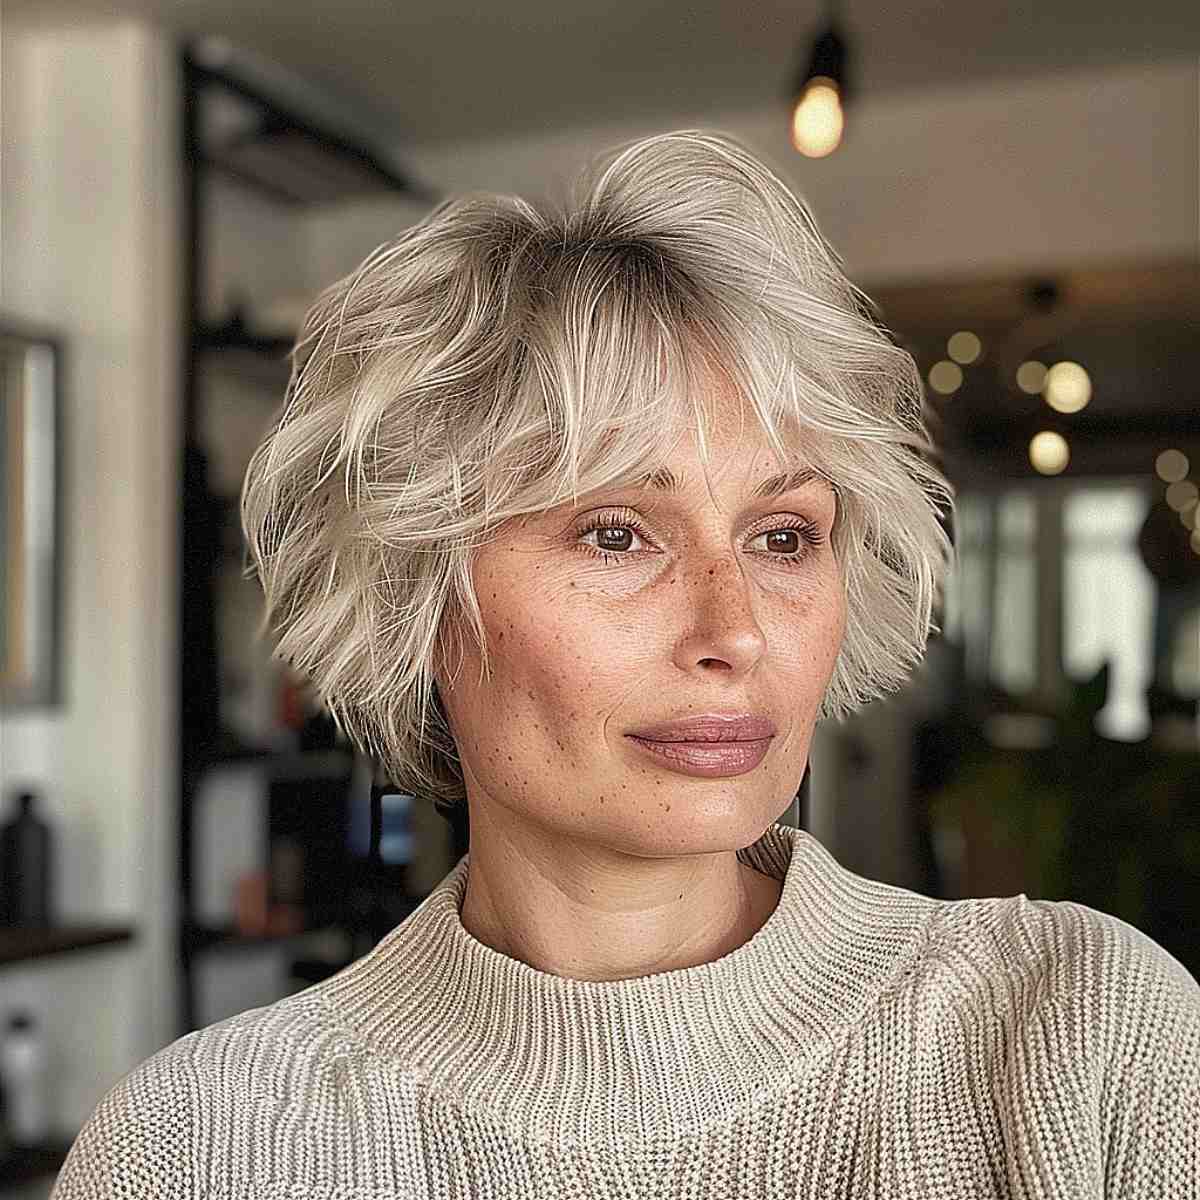 Salt-and-Pepper Razored Bob for Ladies in Their 60s